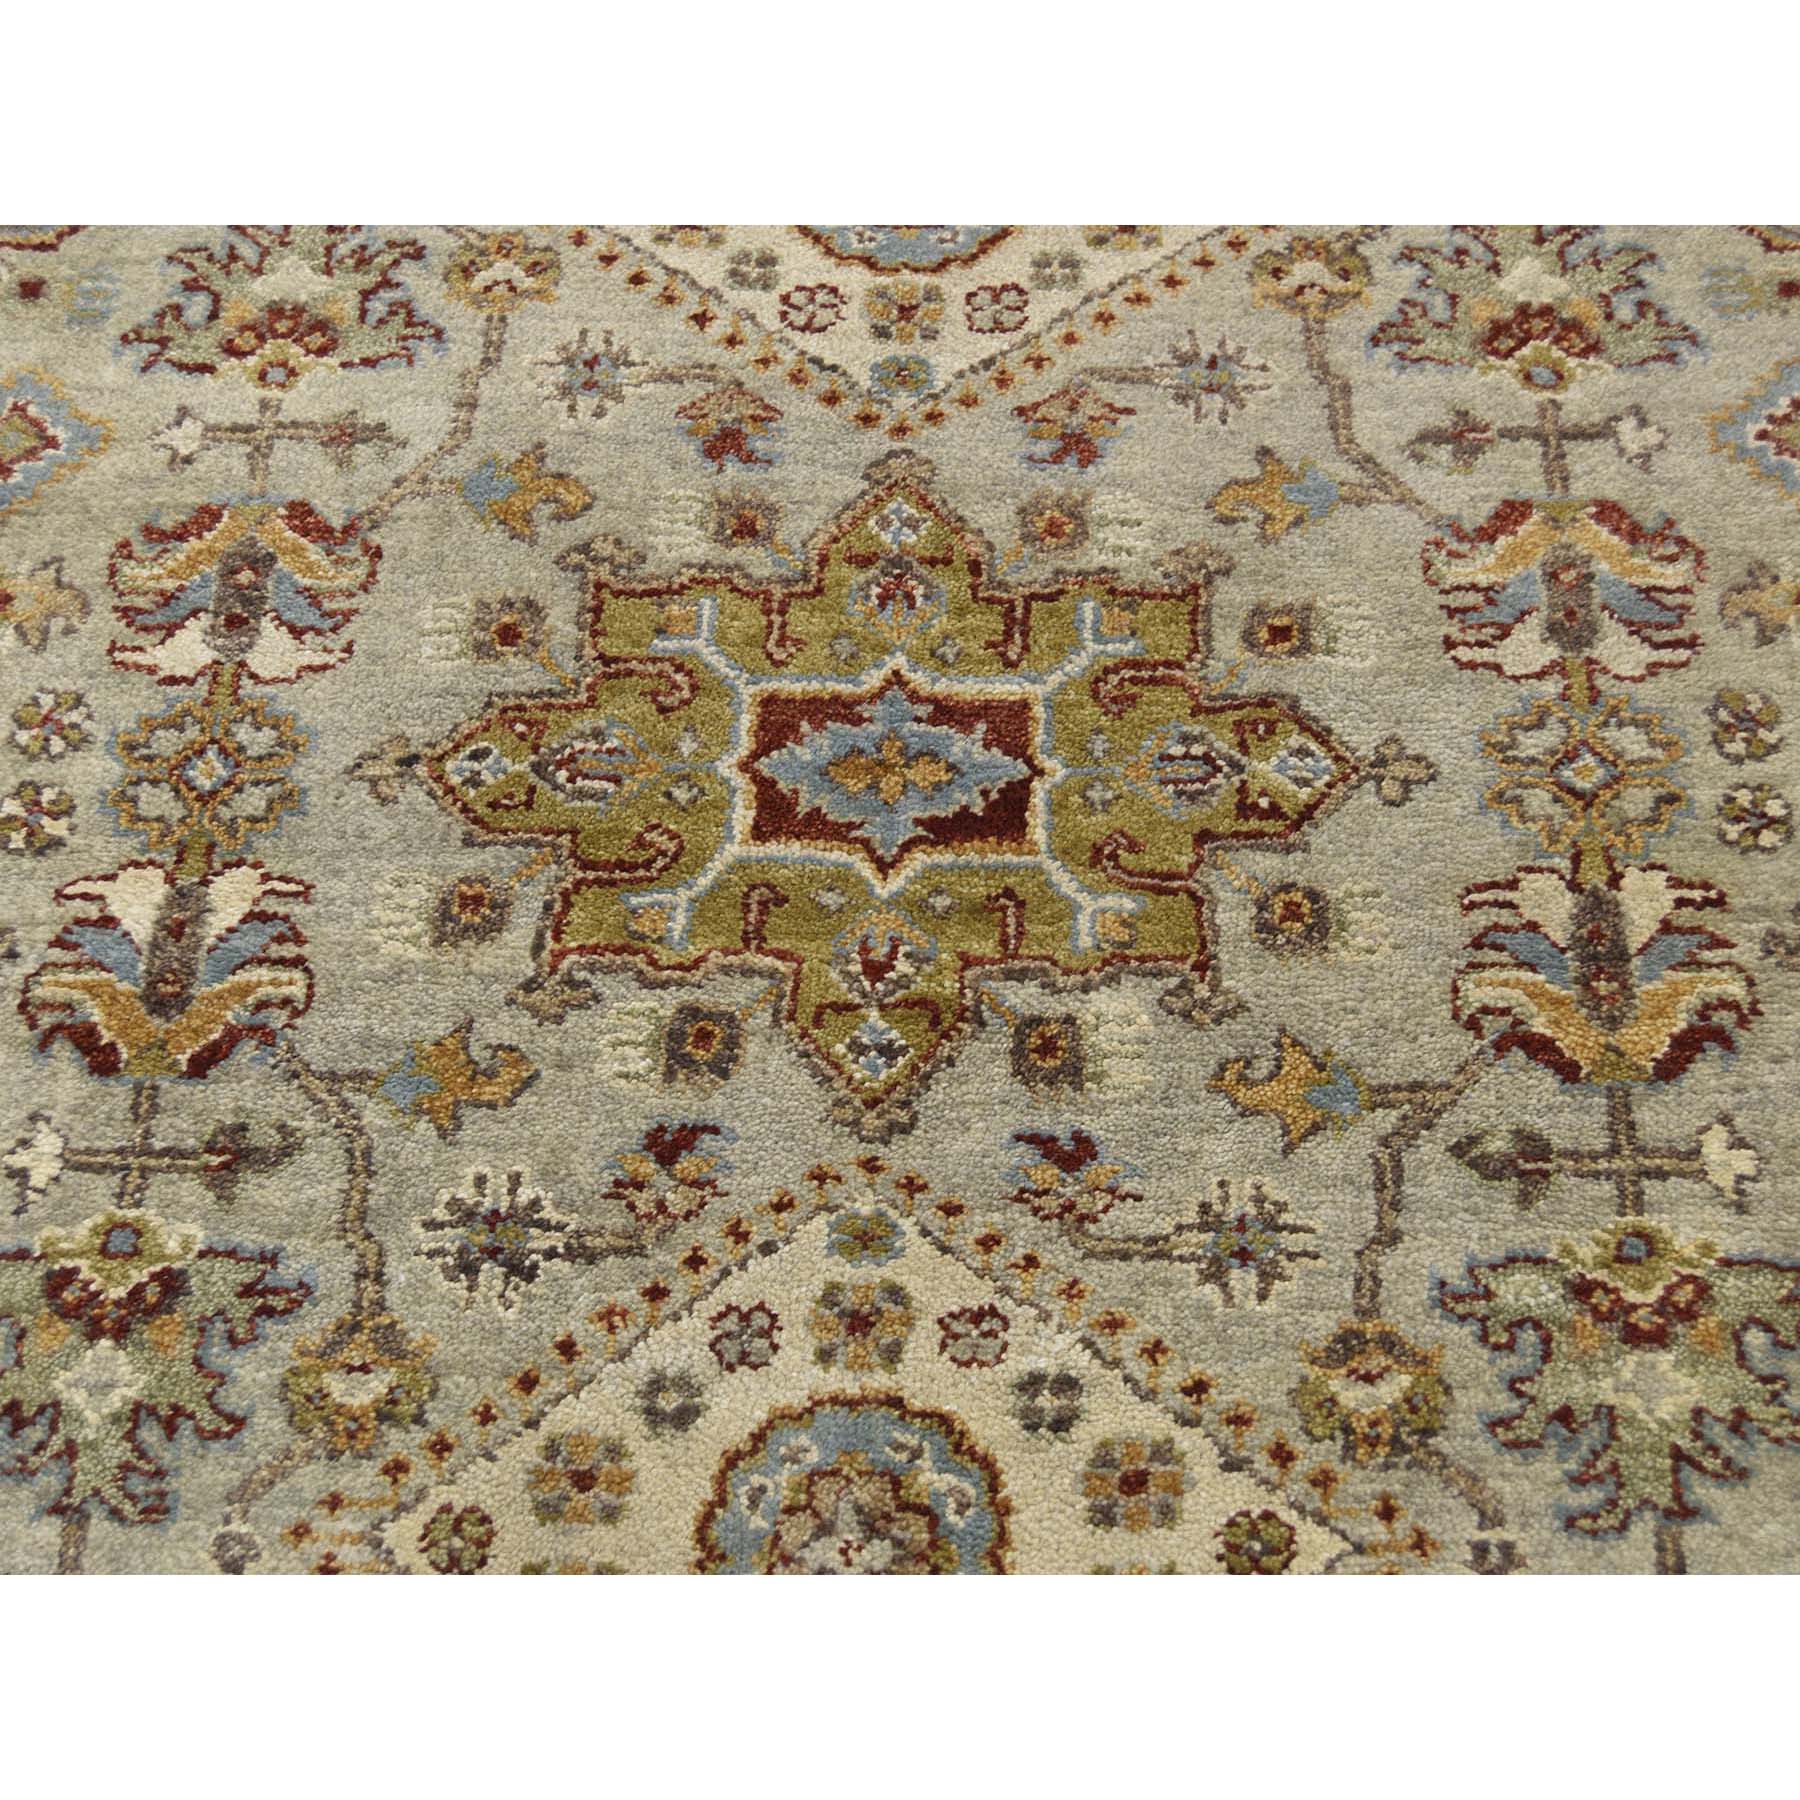 8-x8- Hand-Knotted Silver Karajeh Design Pure Wool Round Oriental Rug 